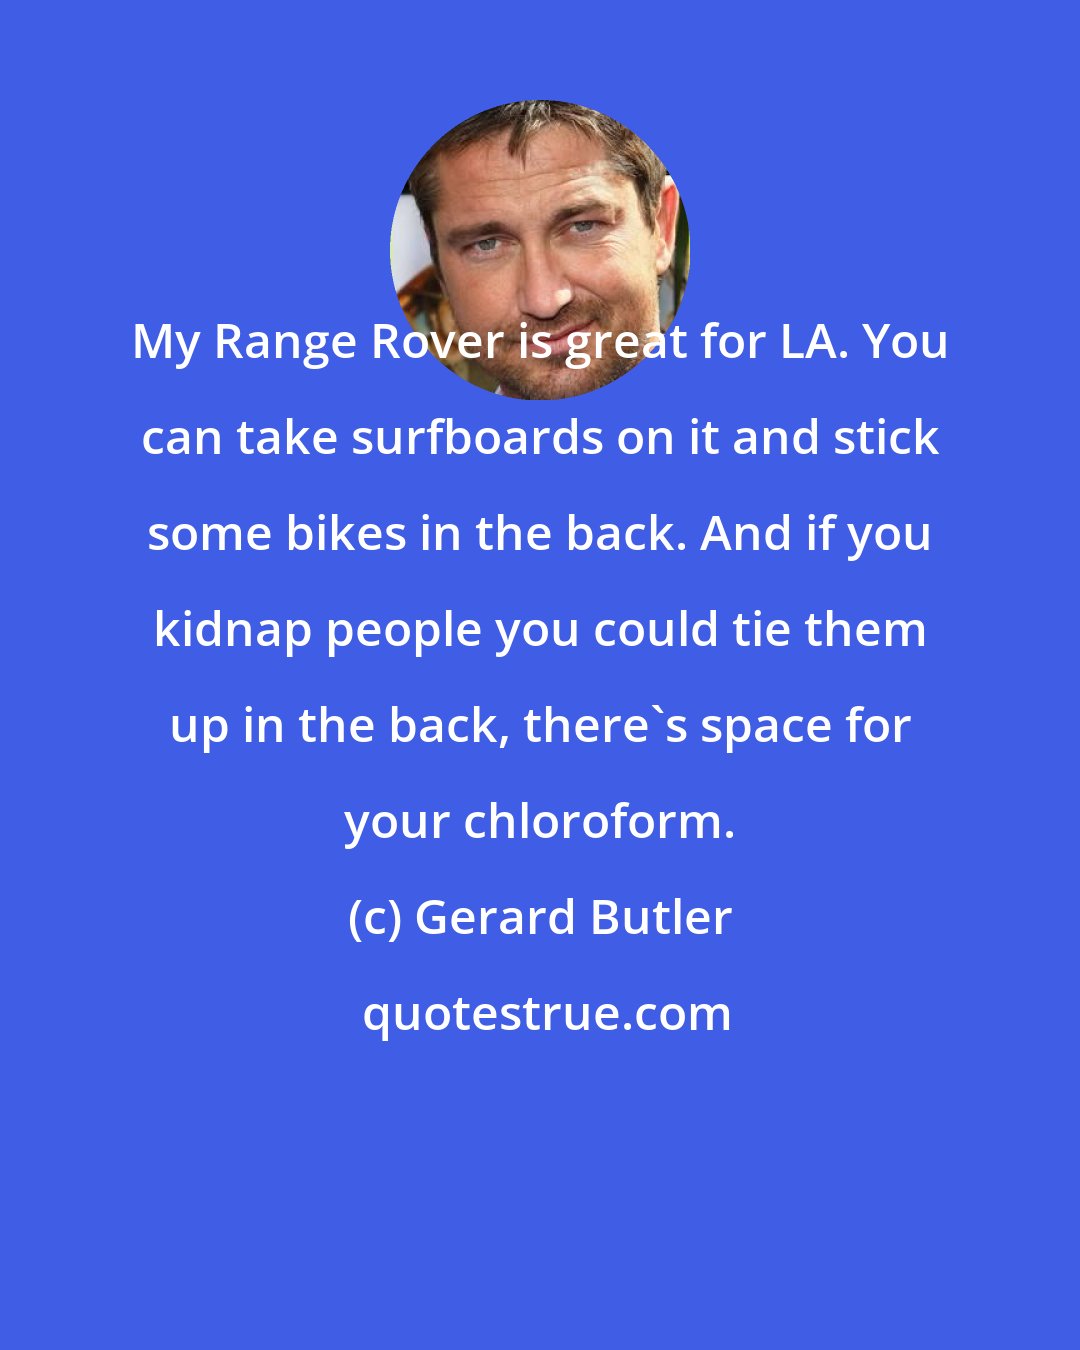 Gerard Butler: My Range Rover is great for LA. You can take surfboards on it and stick some bikes in the back. And if you kidnap people you could tie them up in the back, there's space for your chloroform.